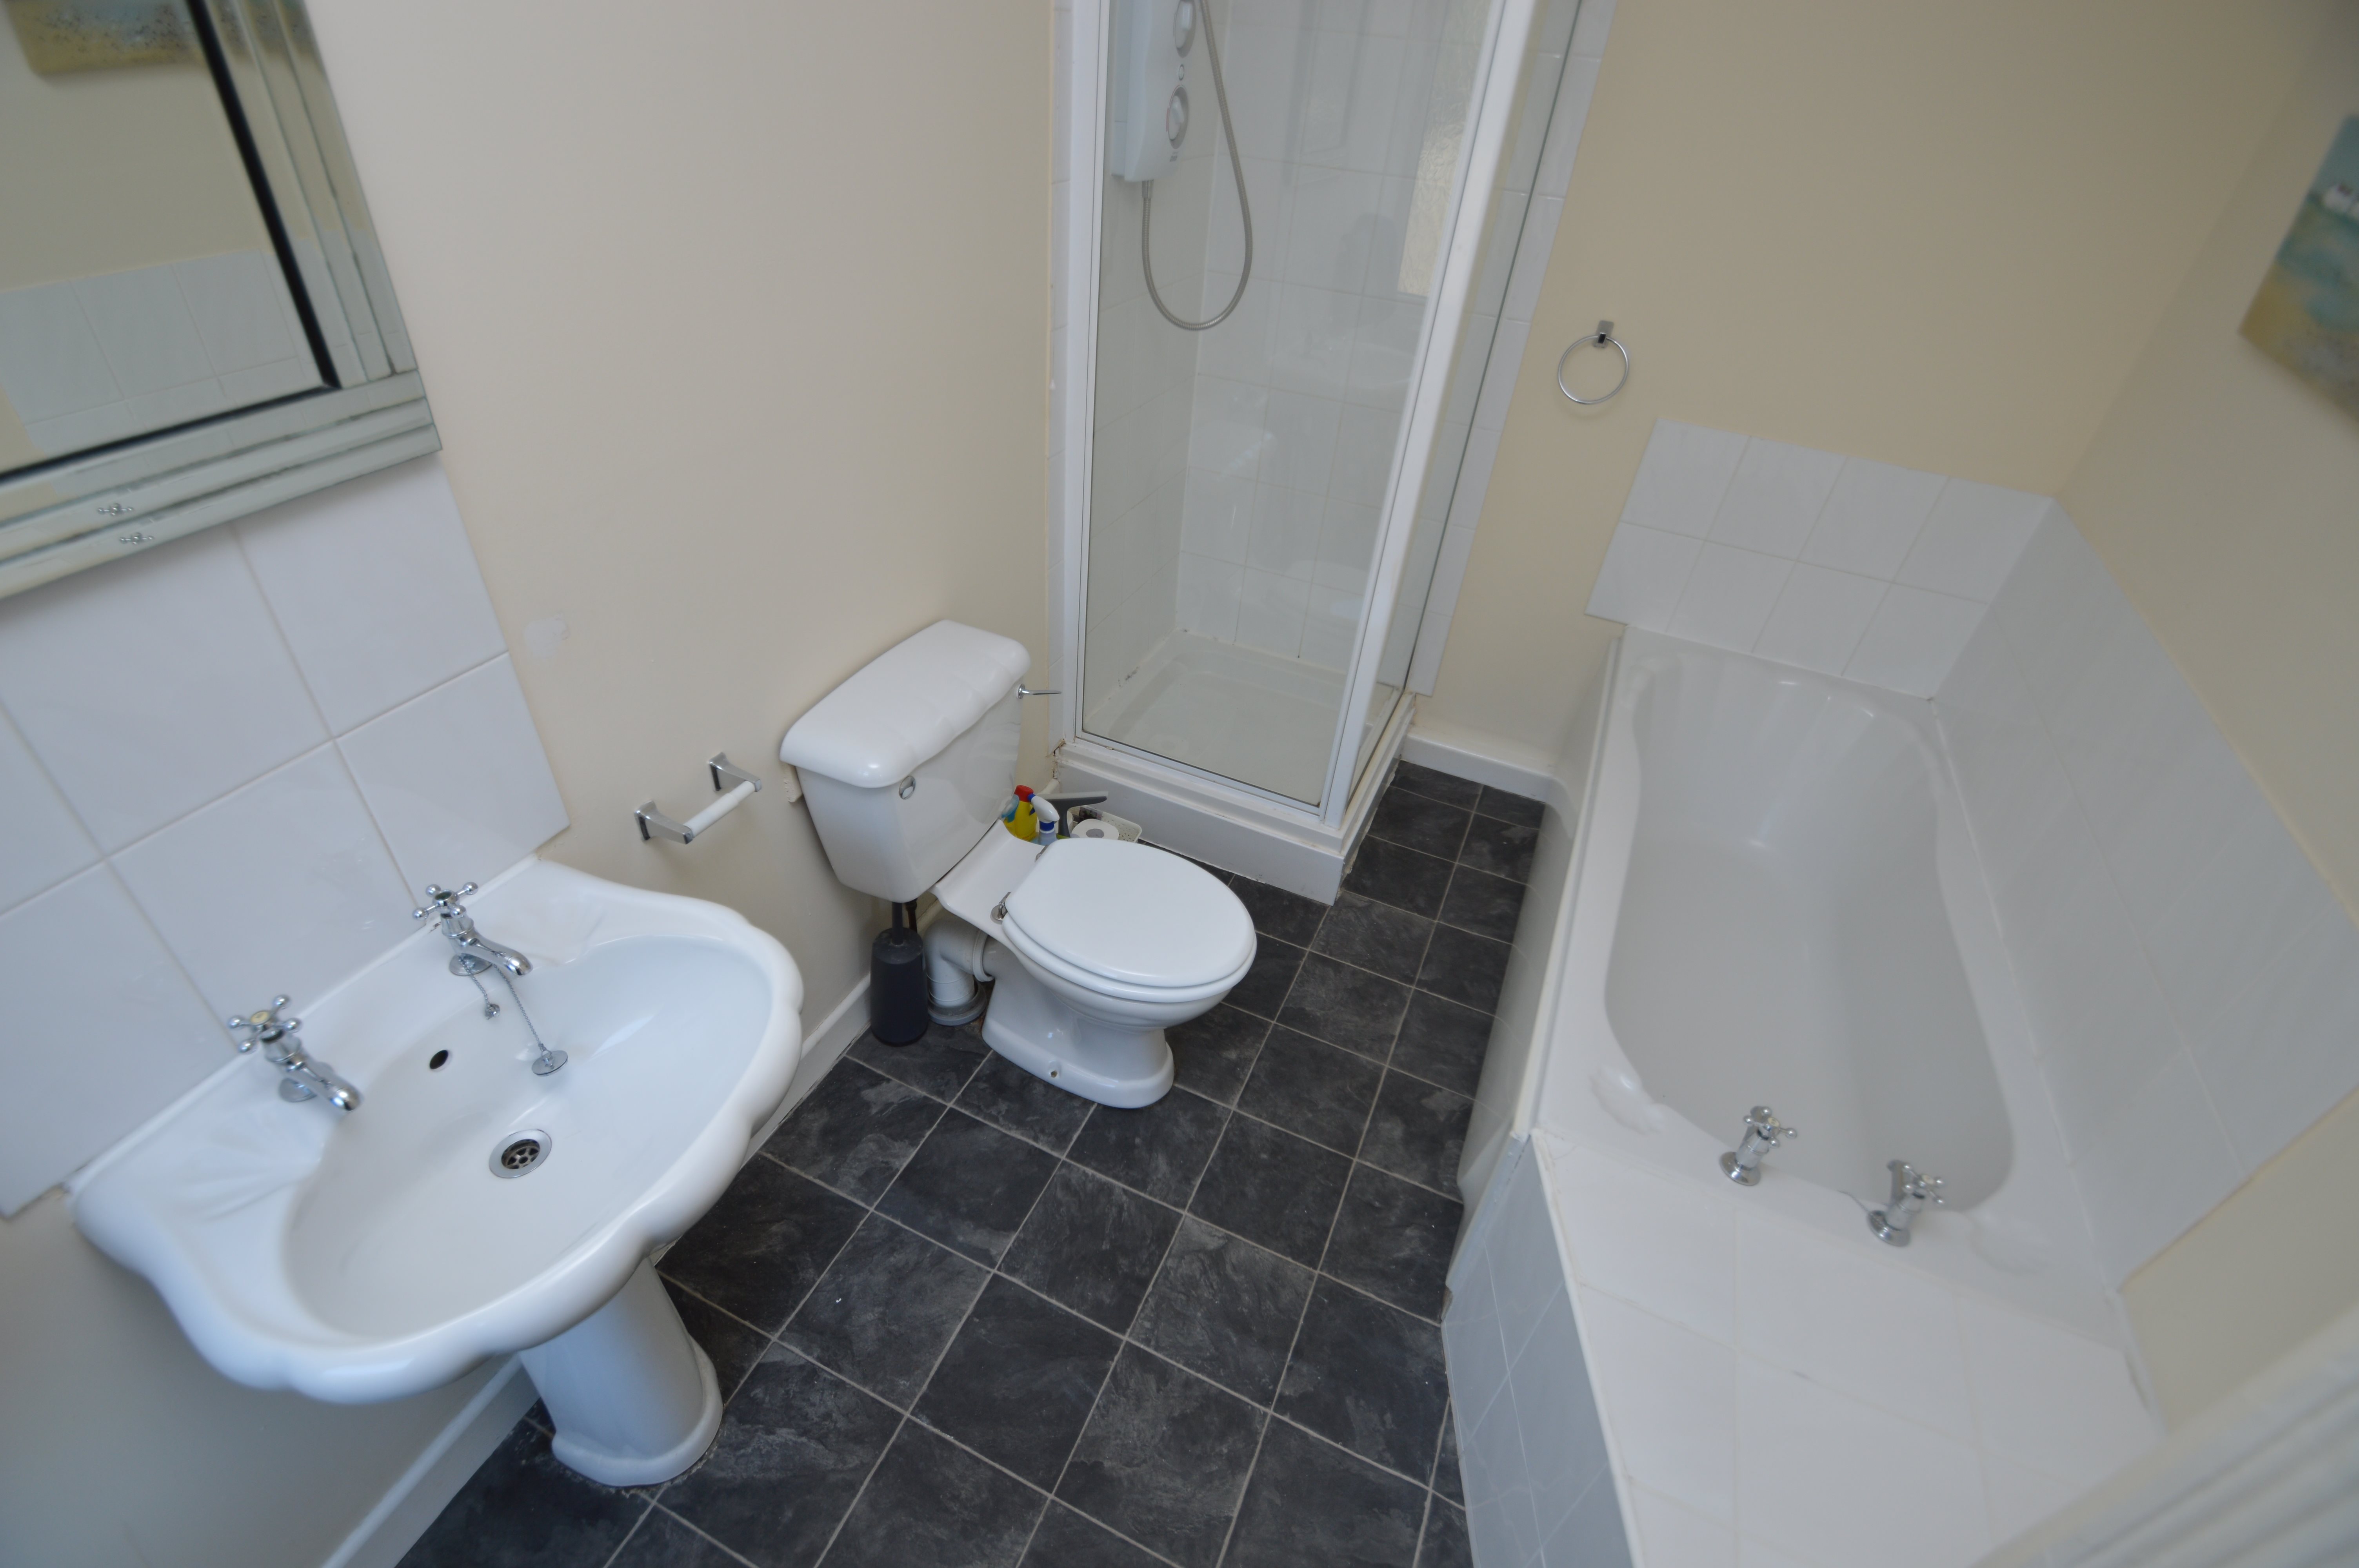 1 bed house / flat share to rent in Wood Road , Treforest   - Property Image 9